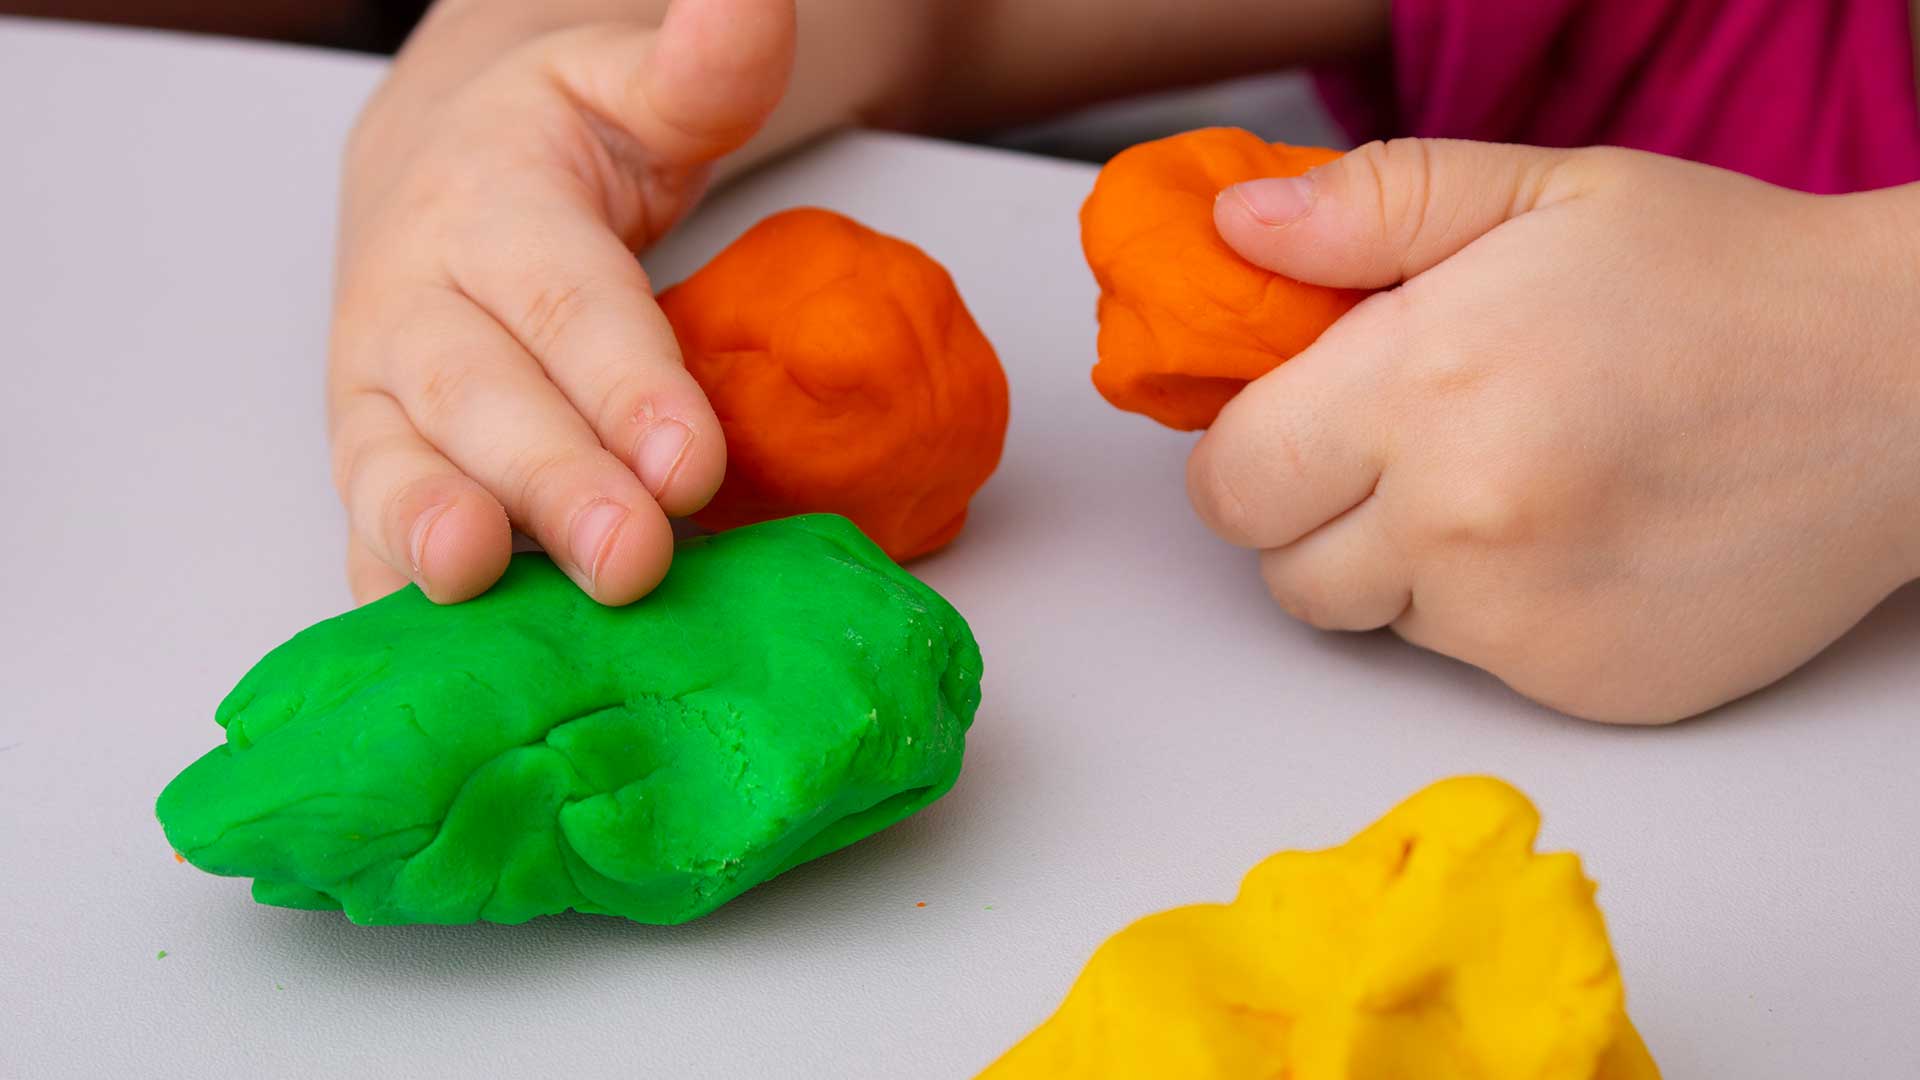 5 Multisensory Games For Your Toddler That Develop Math Skills